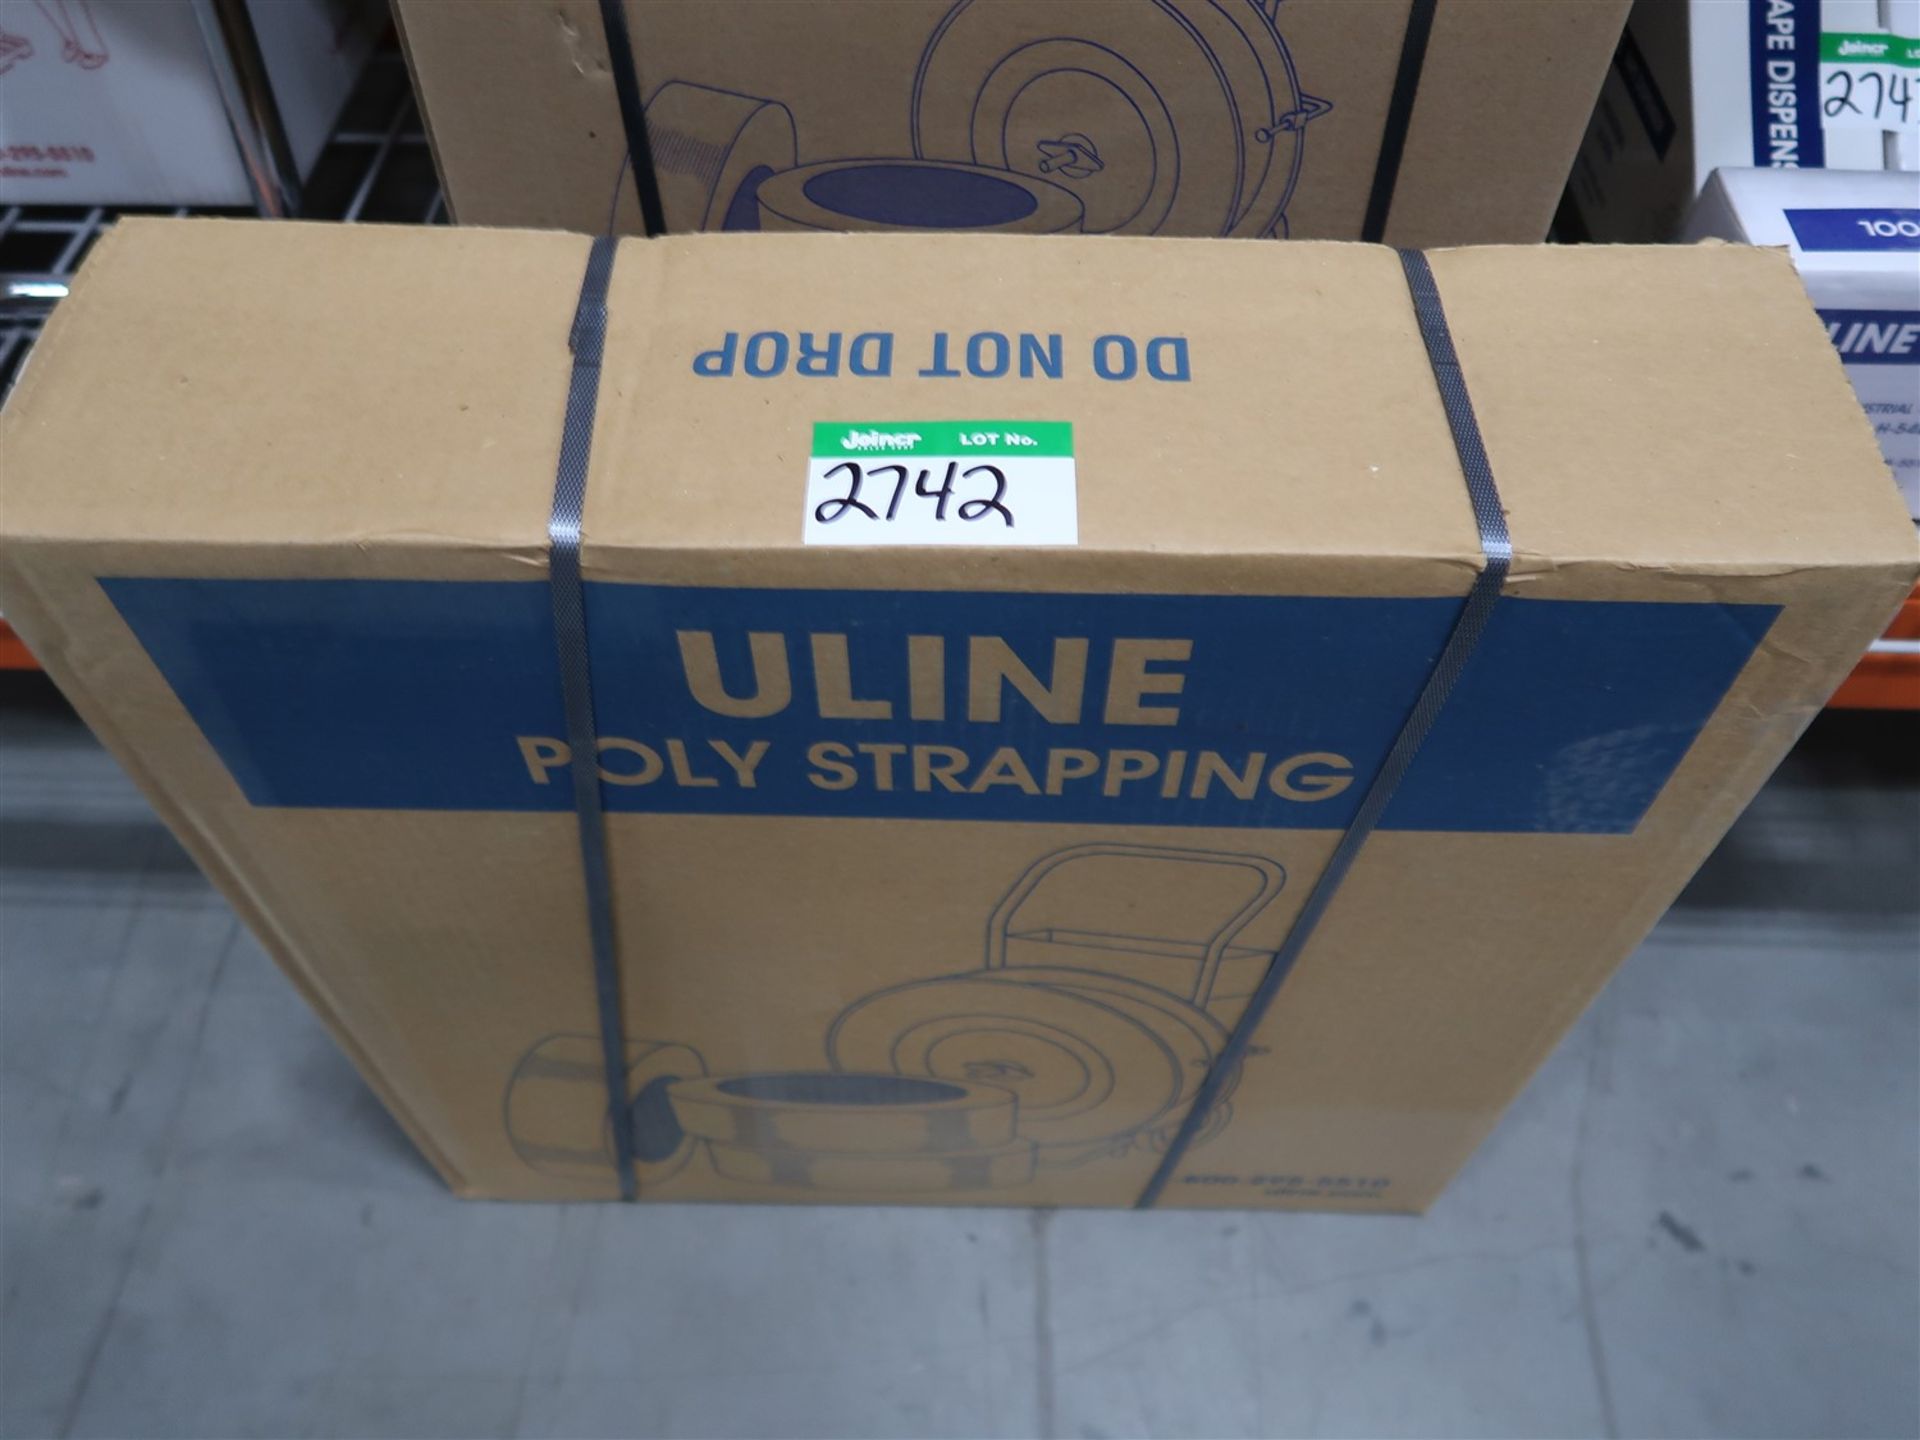 BOX OF ULINE POLY STRAPPING